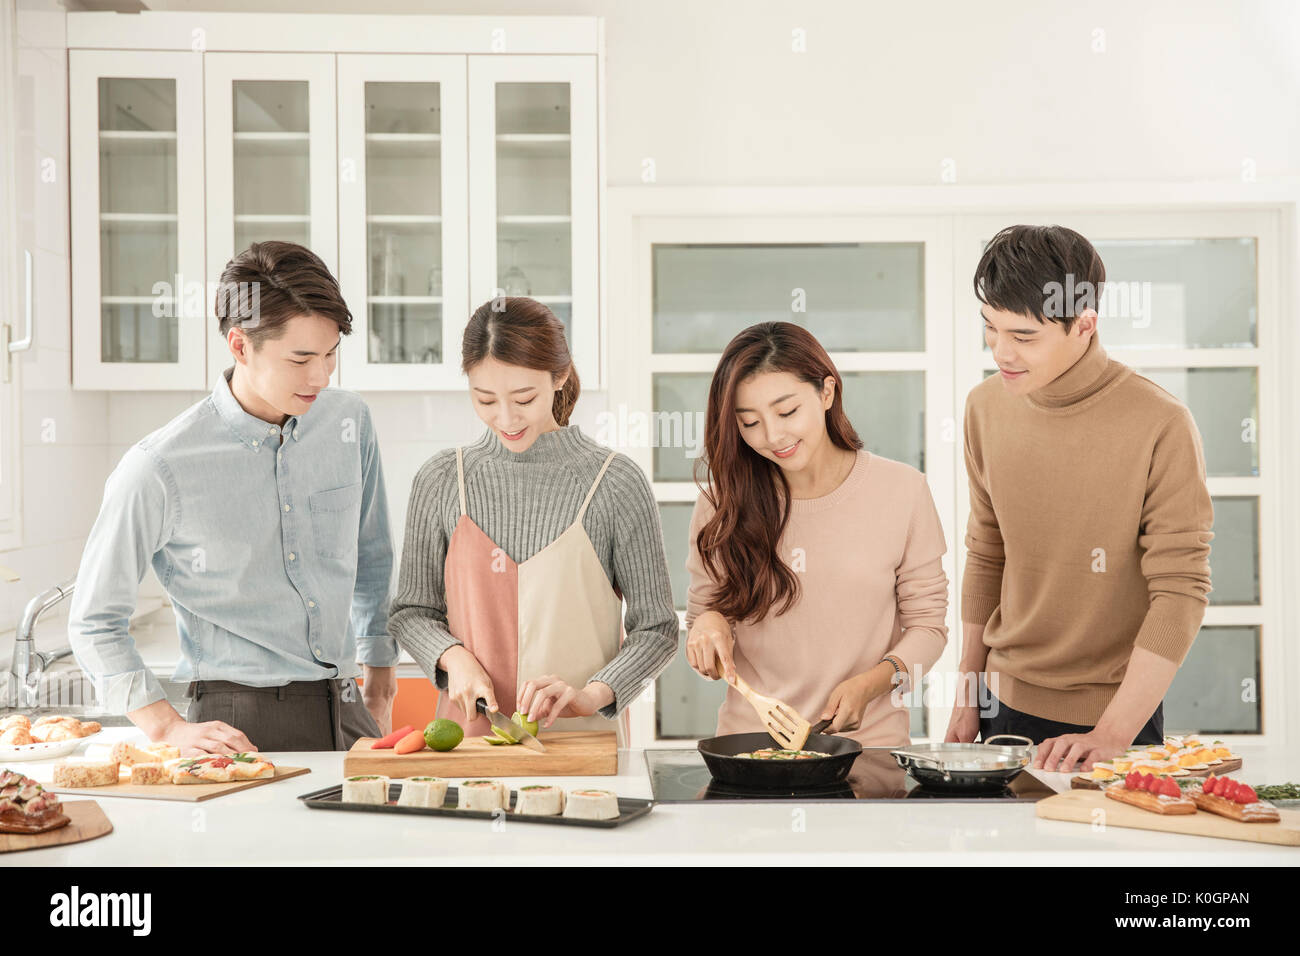 Young smiling people preparing for dessert for party in kitchen Stock Photo